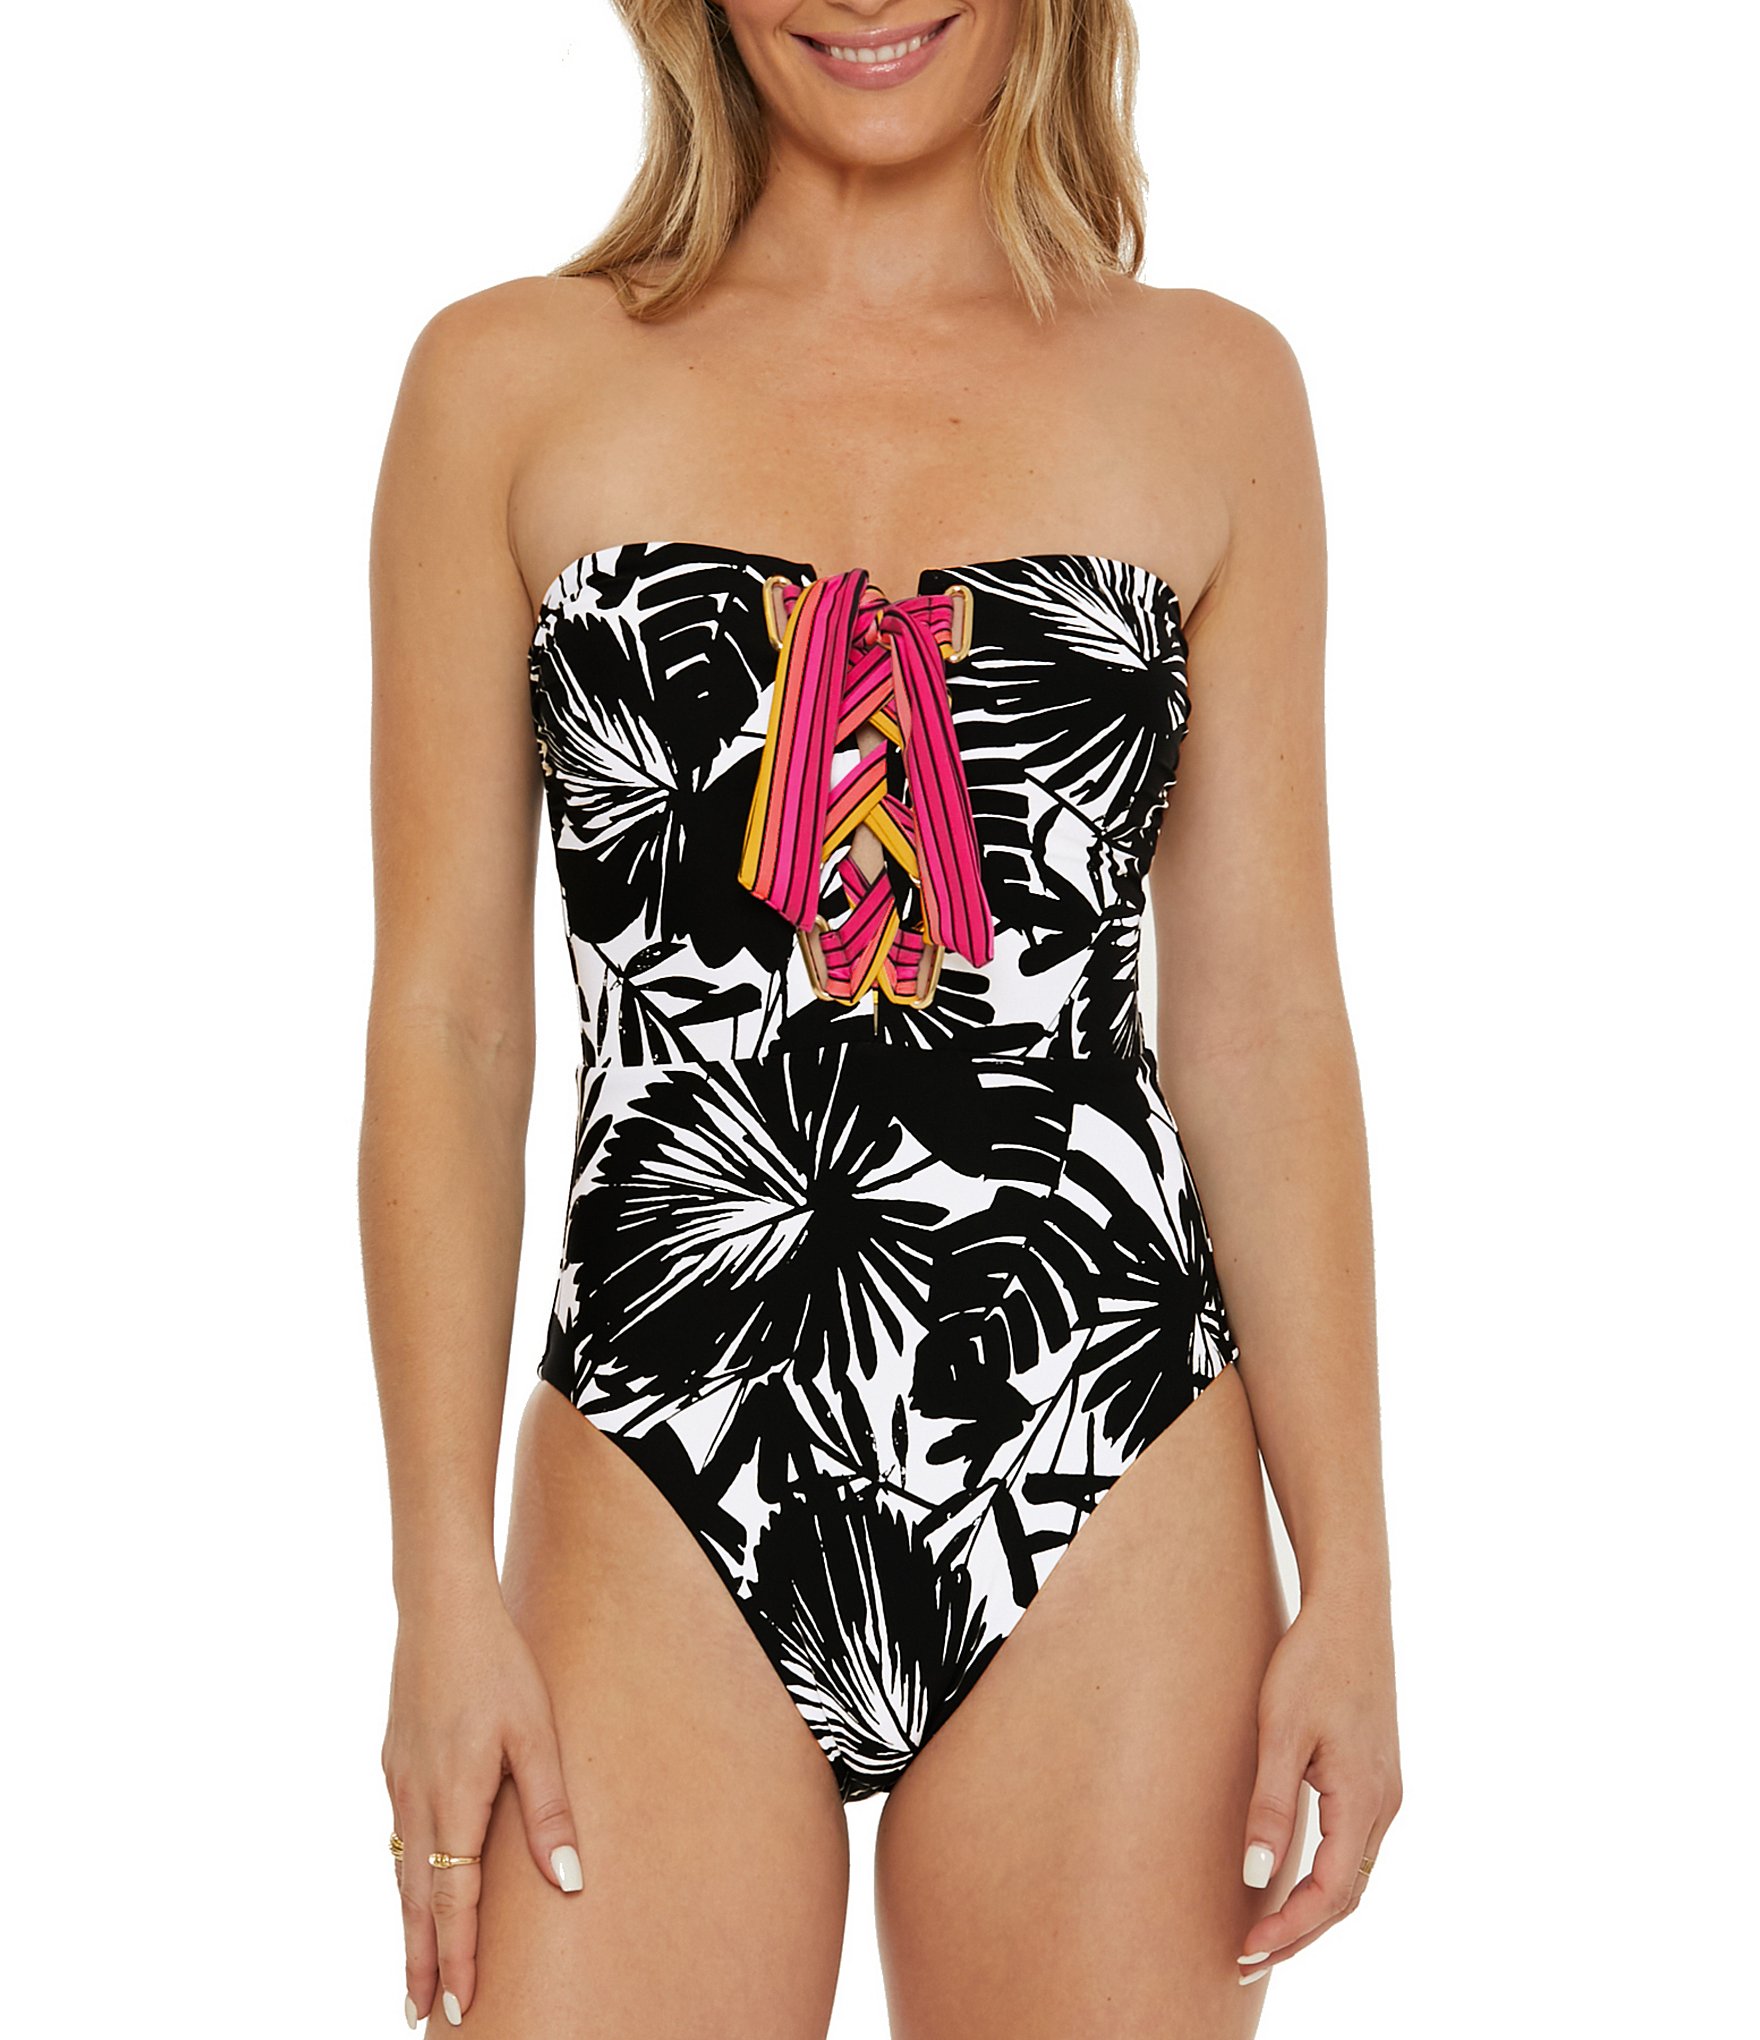 Seafolly Wish You Were Here Bandeau One-Piece Swimsuit